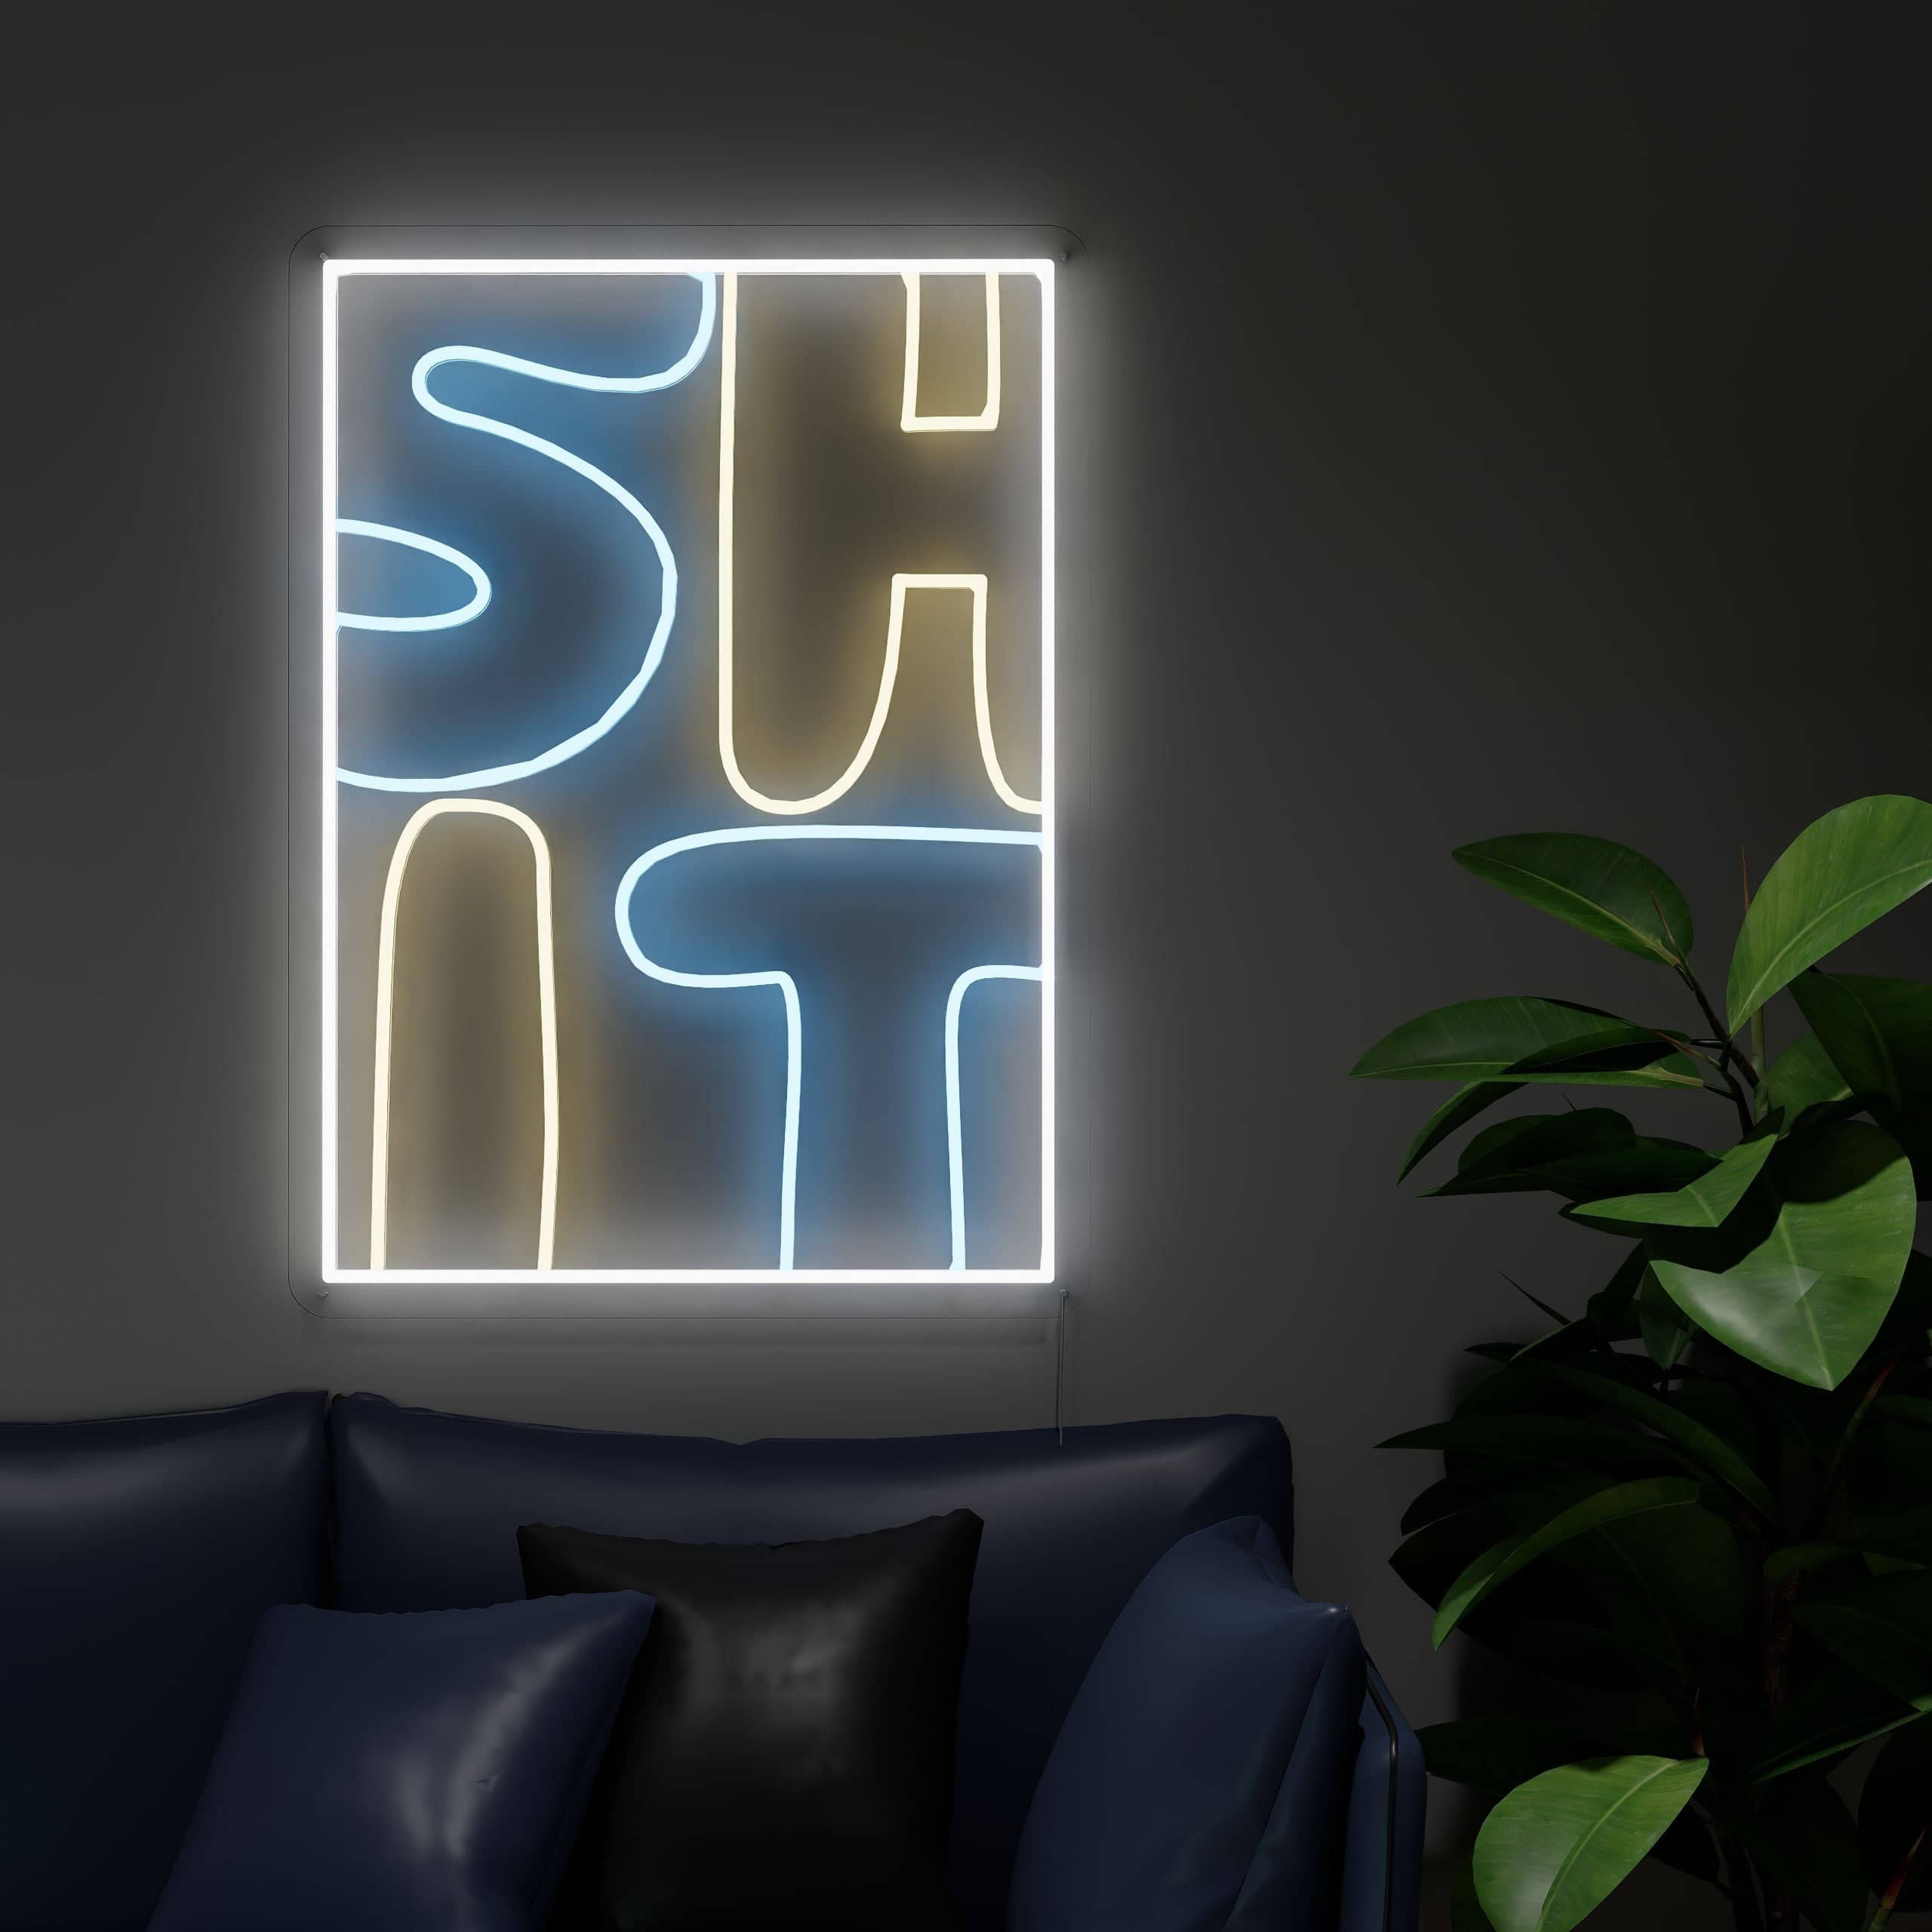 Shit Light sign shines in home gym setting